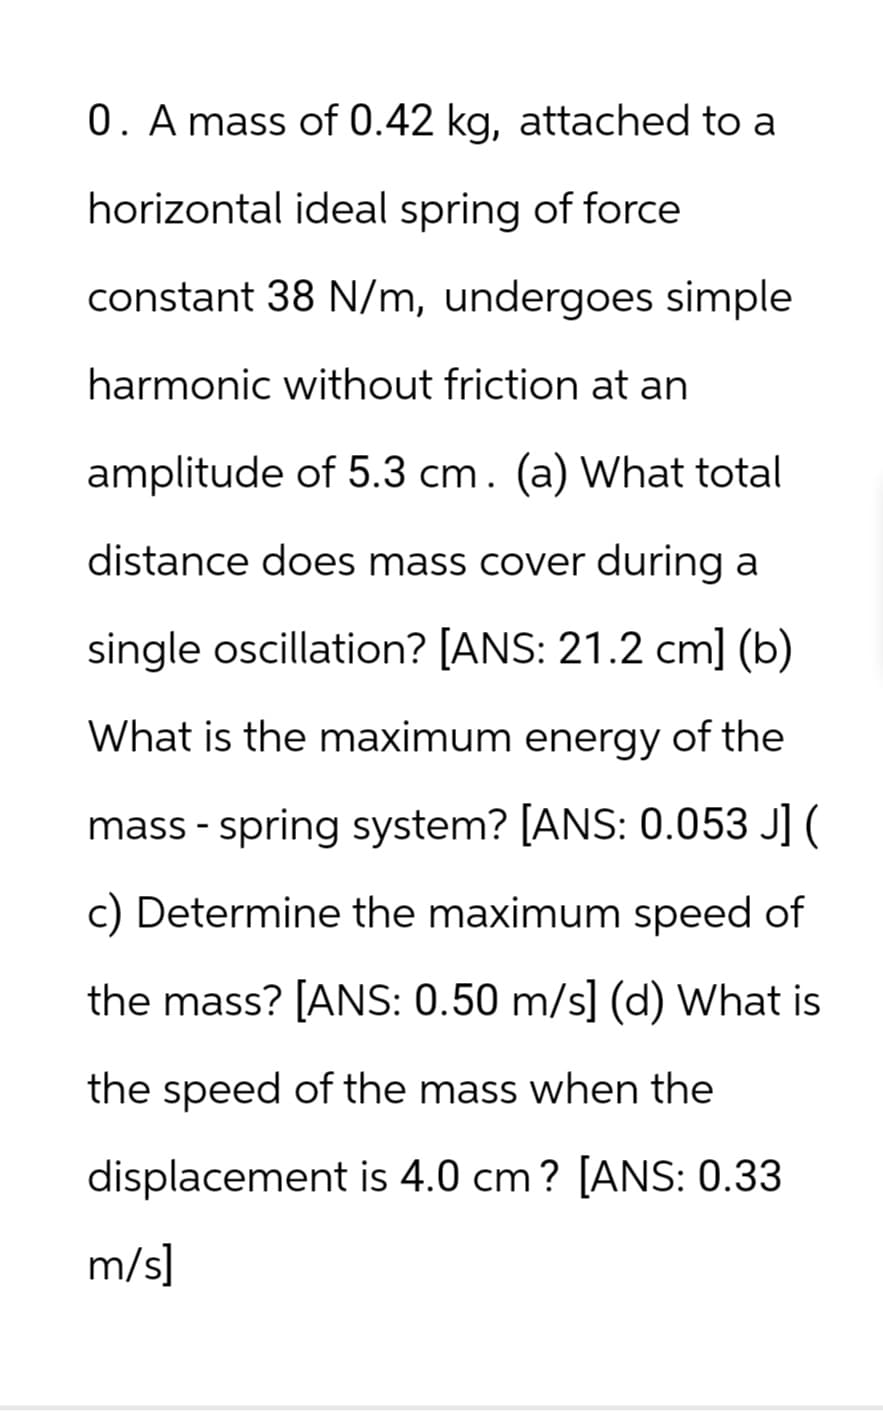 0. A mass of 0.42 kg, attached to a
horizontal ideal spring of force
constant 38 N/m, undergoes simple
harmonic without friction at an
amplitude of 5.3 cm. (a) What total
distance does mass cover during a
single oscillation? [ANS: 21.2 cm] (b)
What is the maximum energy of the
mass - spring system? [ANS: 0.053 J] (
c) Determine the maximum speed of
the mass? [ANS: 0.50 m/s] (d) What is
the speed of the mass when the
displacement is 4.0 cm? [ANS: 0.33
m/s]